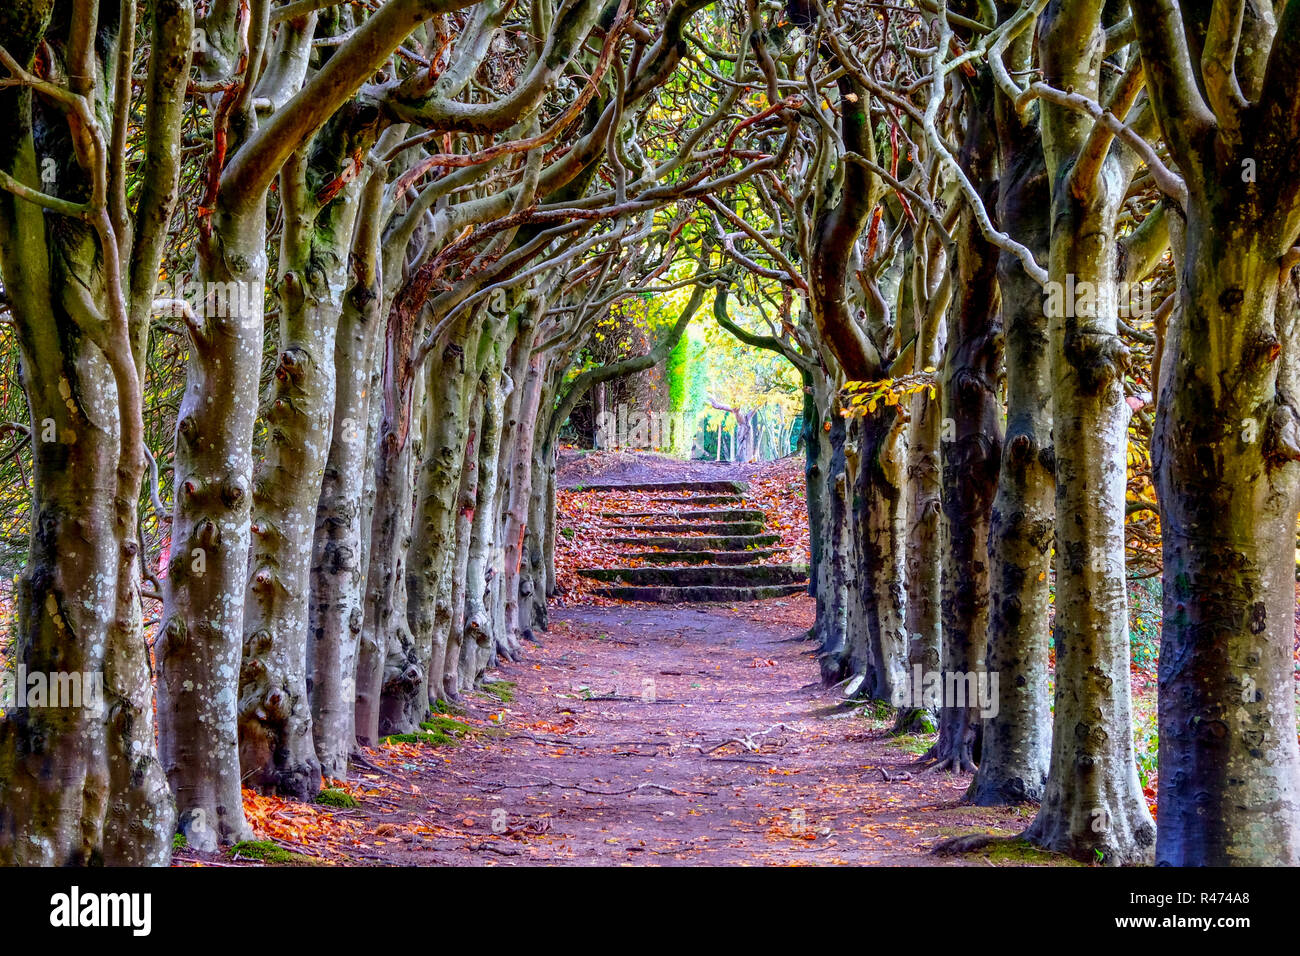 looking down the middle of a tree lined pathway, the treea are old a knarled the top of the trees are wound together forming an arch, it is Autumn Fal Stock Photo